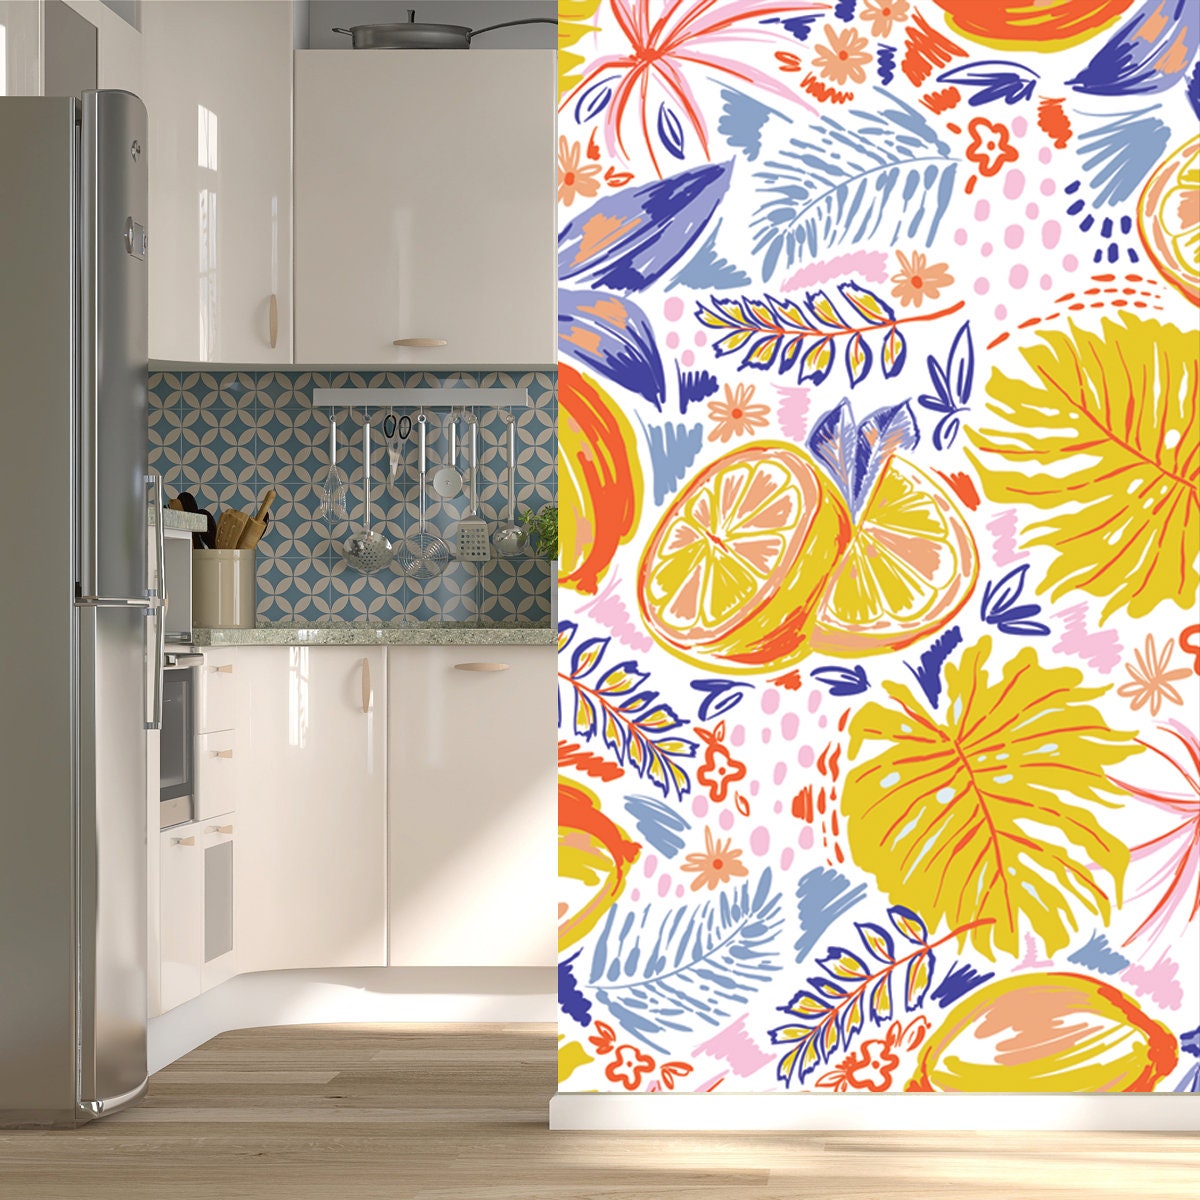 Trendy and Colorful Summer Fruits Lemon and Monstera Leaves Brushed Strokes Style Wallpaper